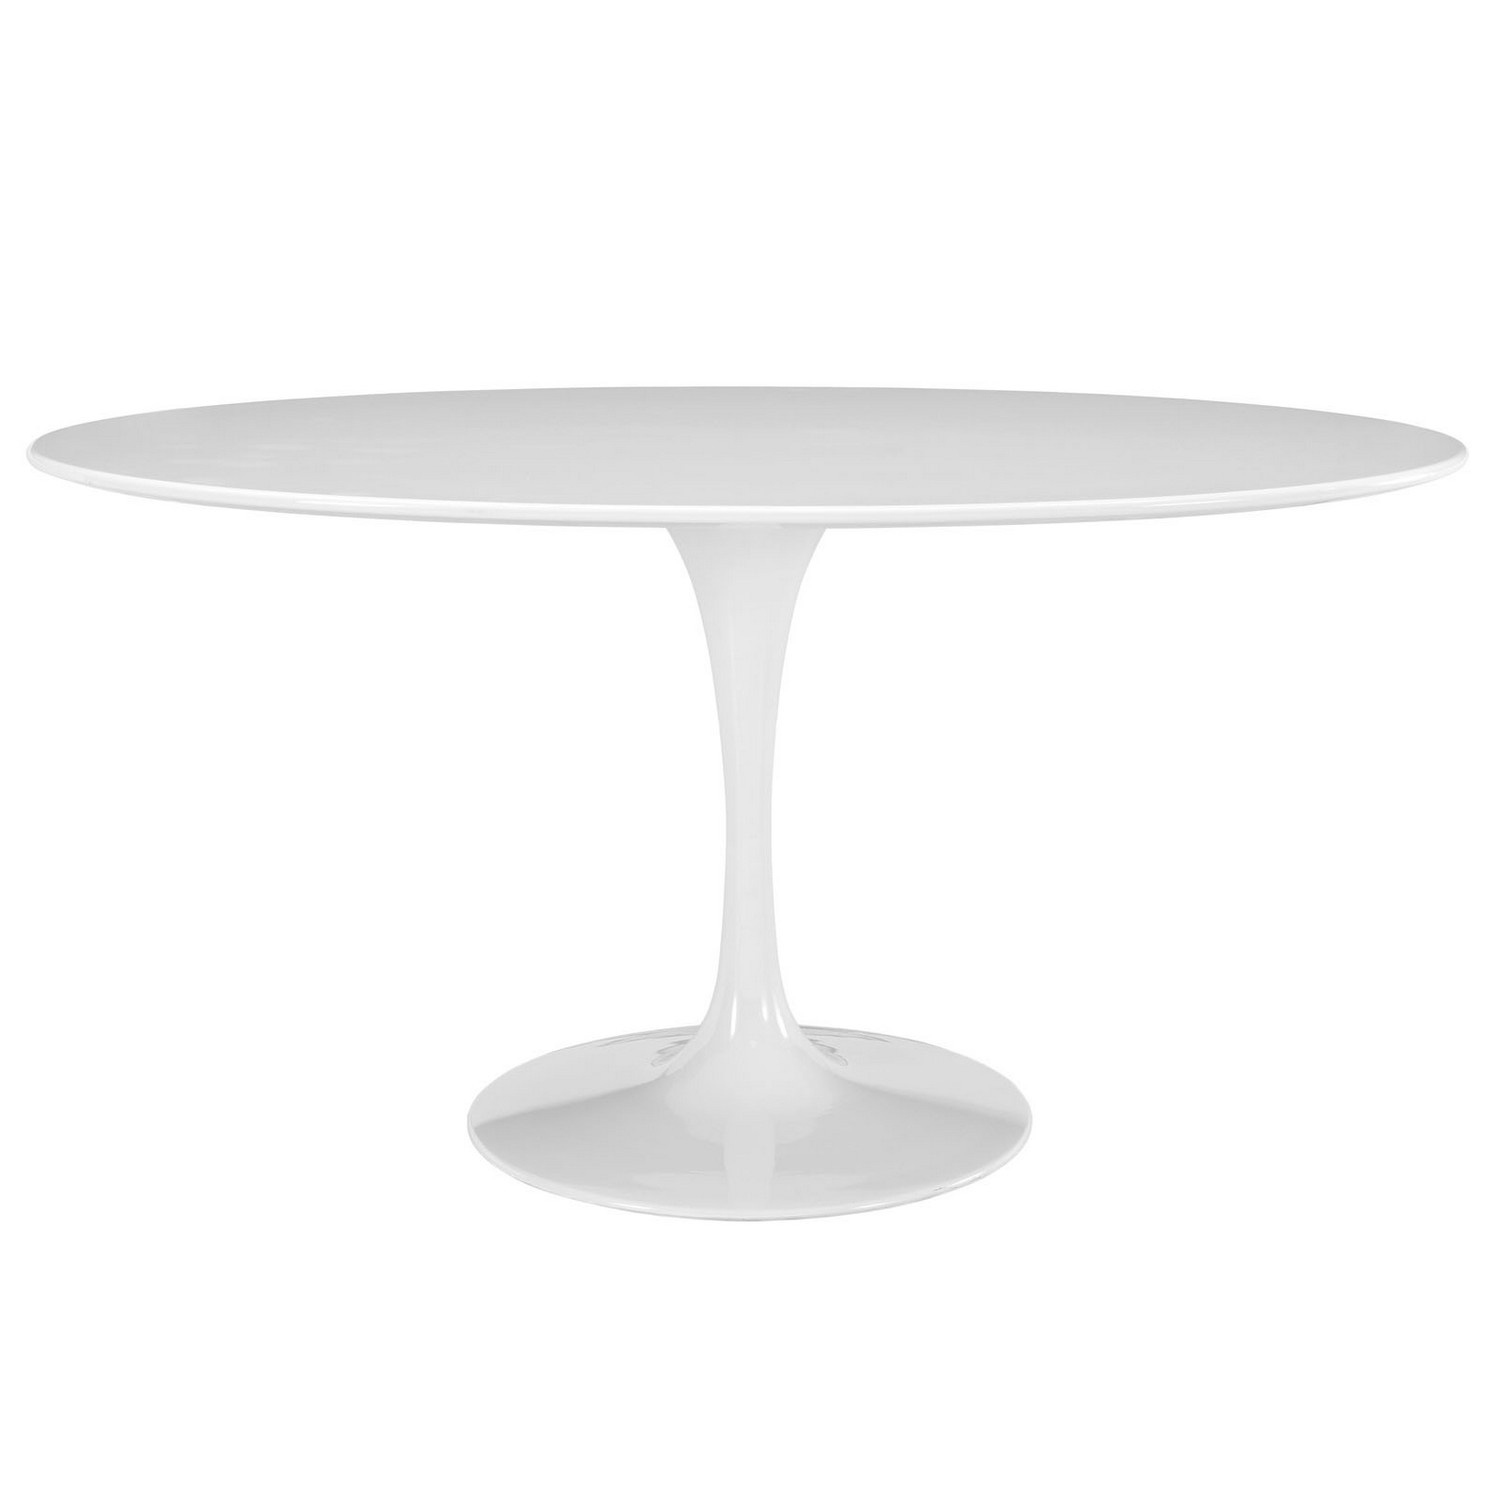 Modway Lippa 60 Oval-Shaped Wood Top Dining Table - White MW-EEI-1121